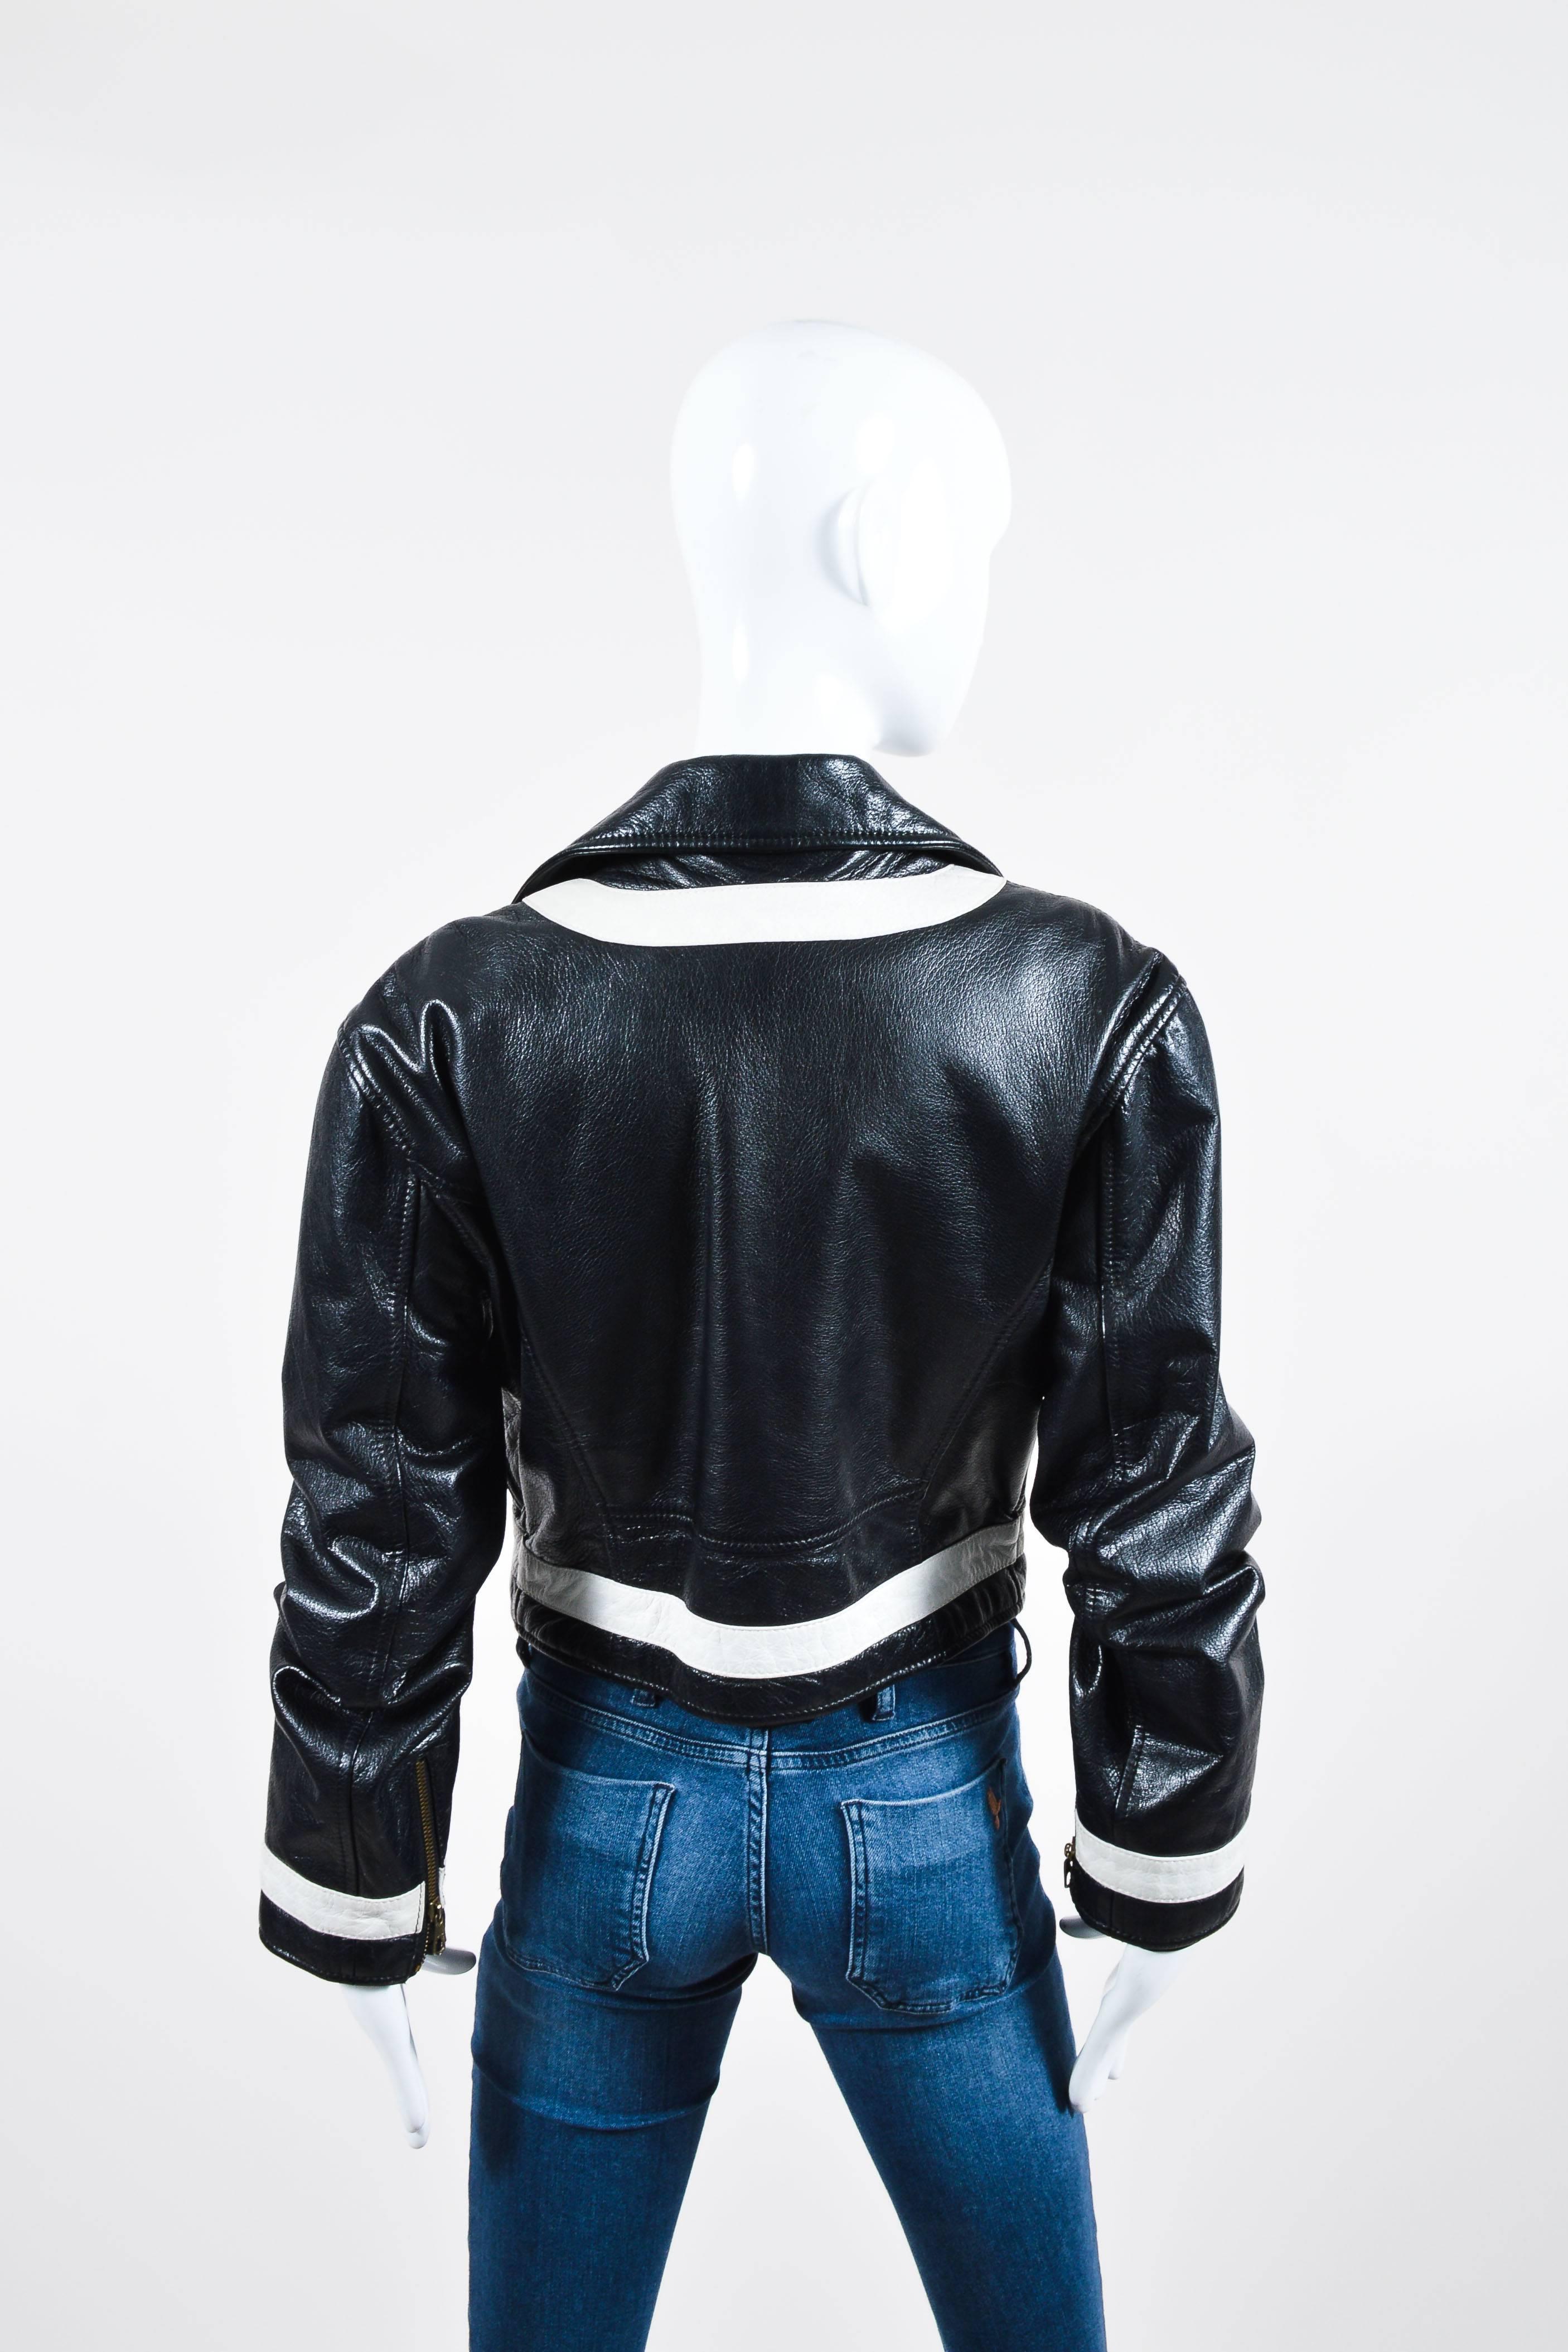 Black leather moto jacket. Cropped length. White leather stripes. Long sleeves with zippers. Gold-tone faux buttons with hearts read, "CHEAP & CHIC." Zip and flap pockets. Off-center front zip closure. Lined.

Additional